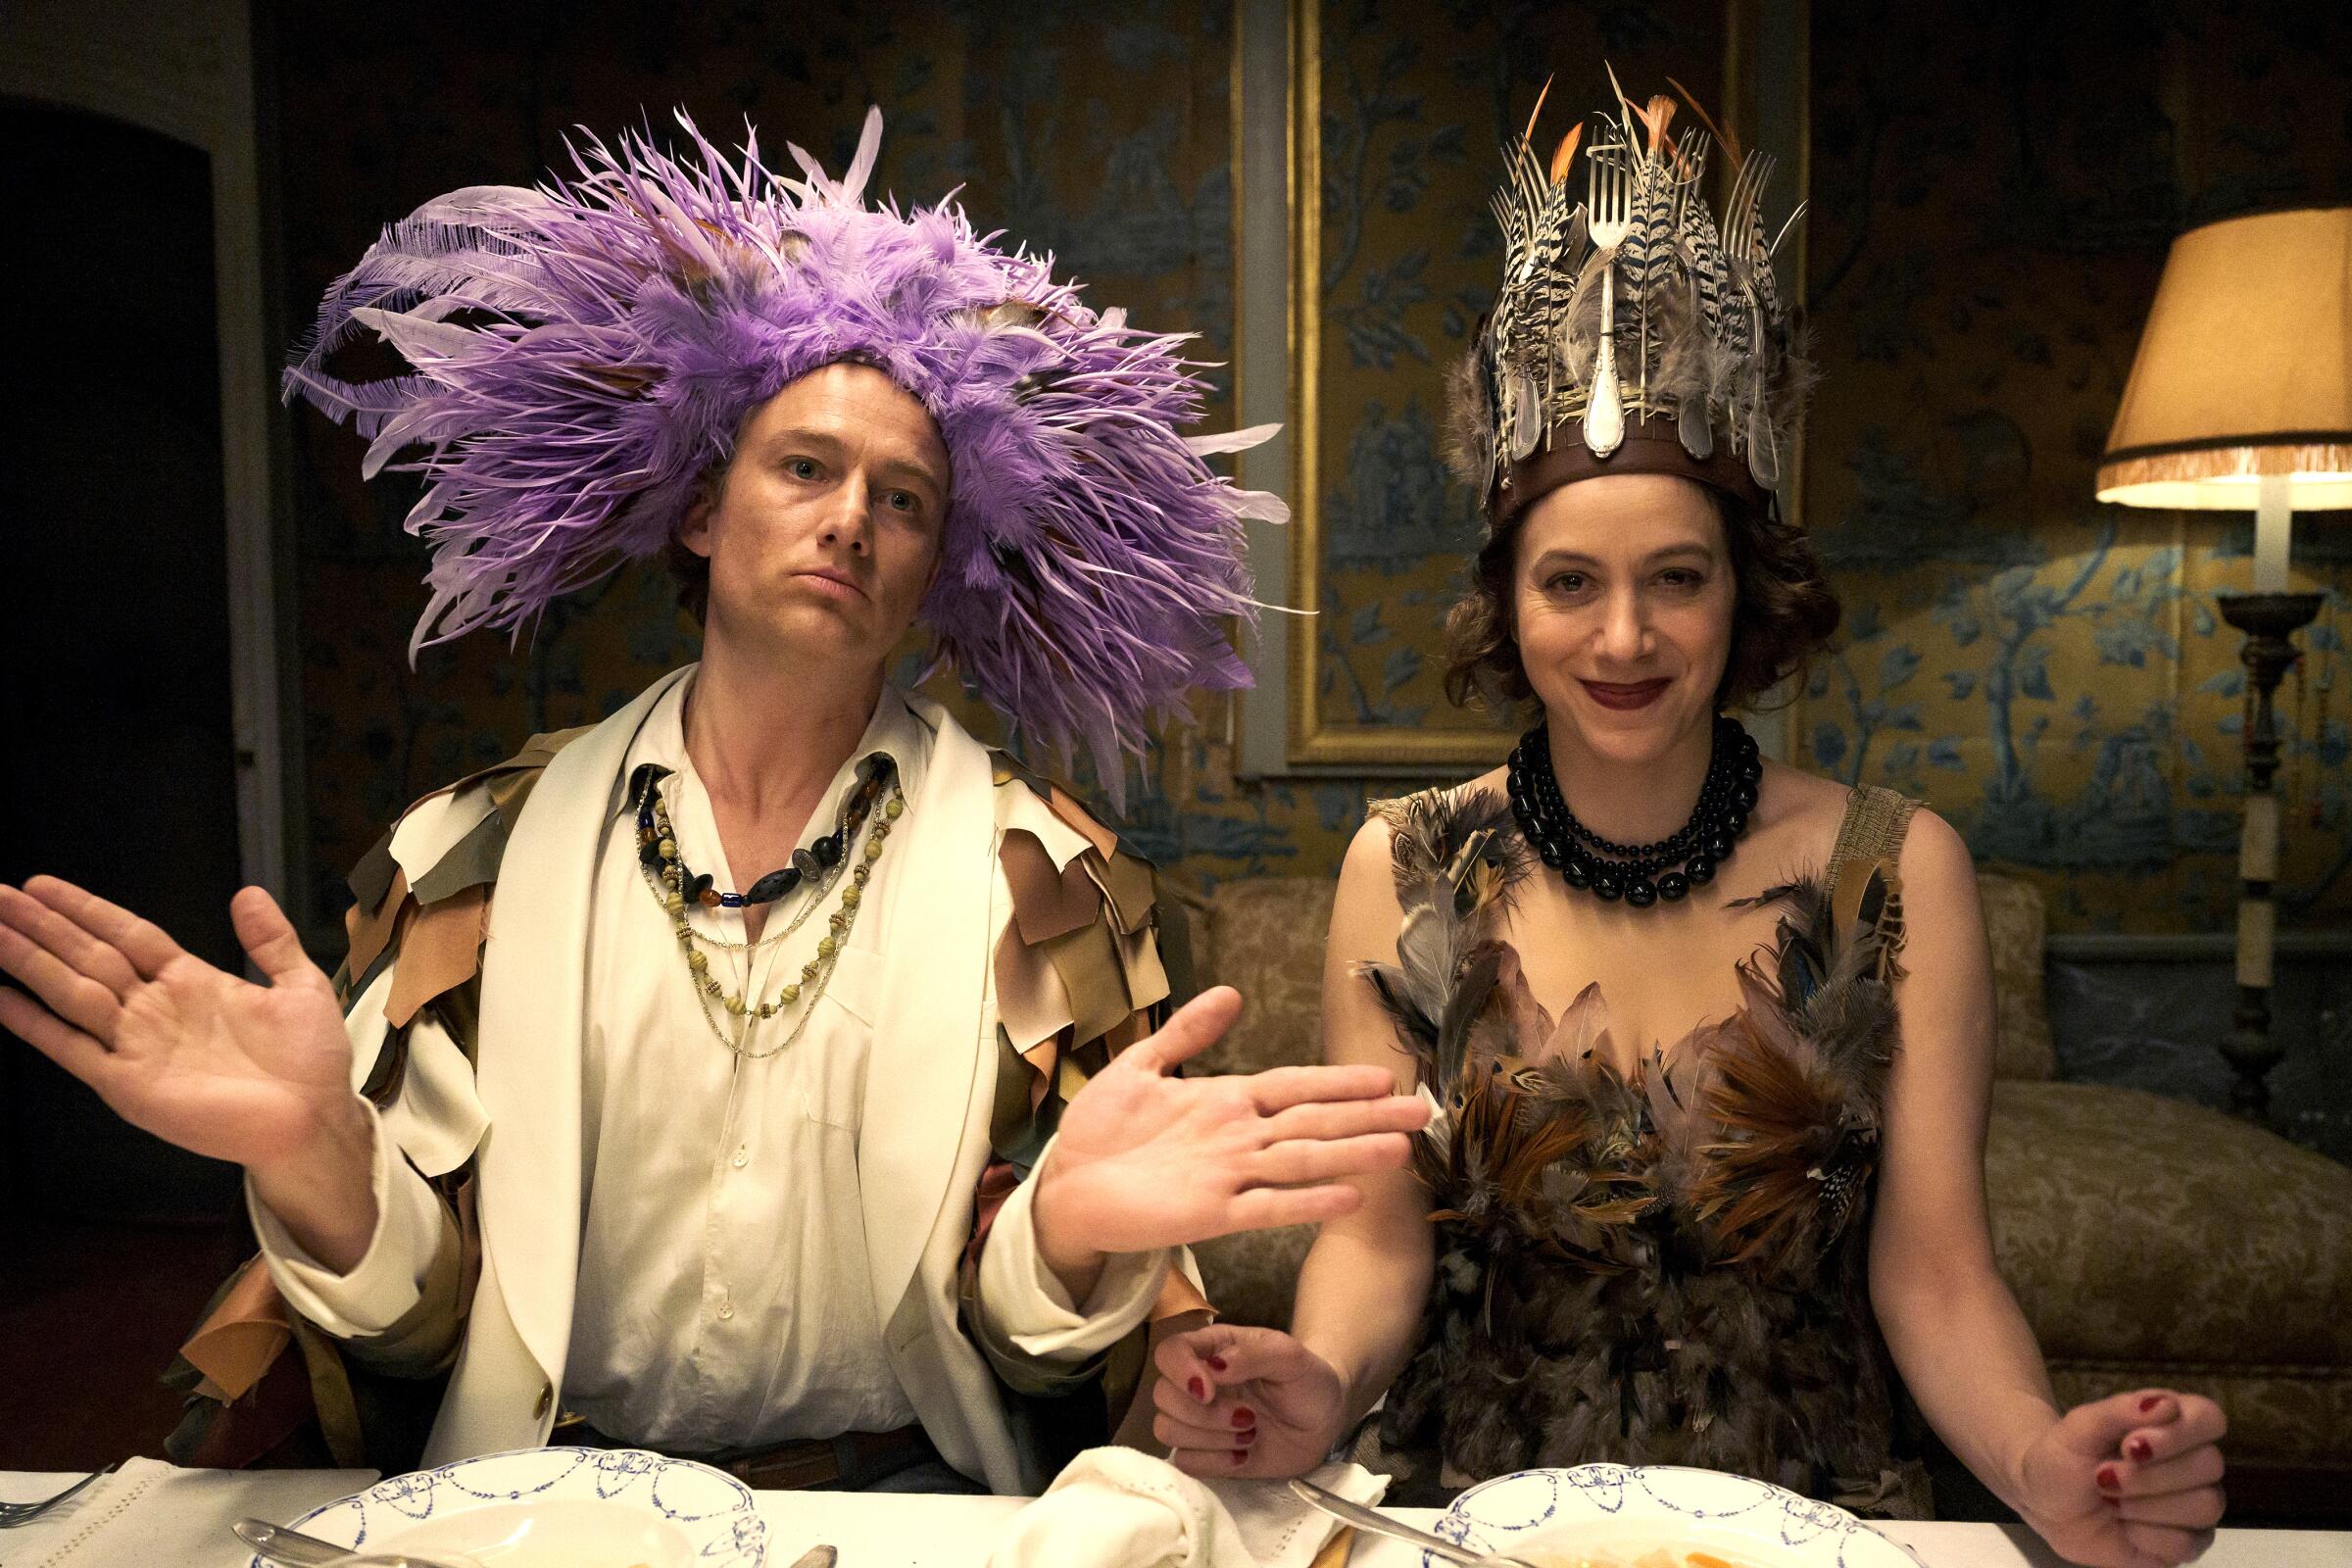 A man wears a headdress of gaudy feathers and a woman dons a crown of forks in a party scene from "Transatlantic."